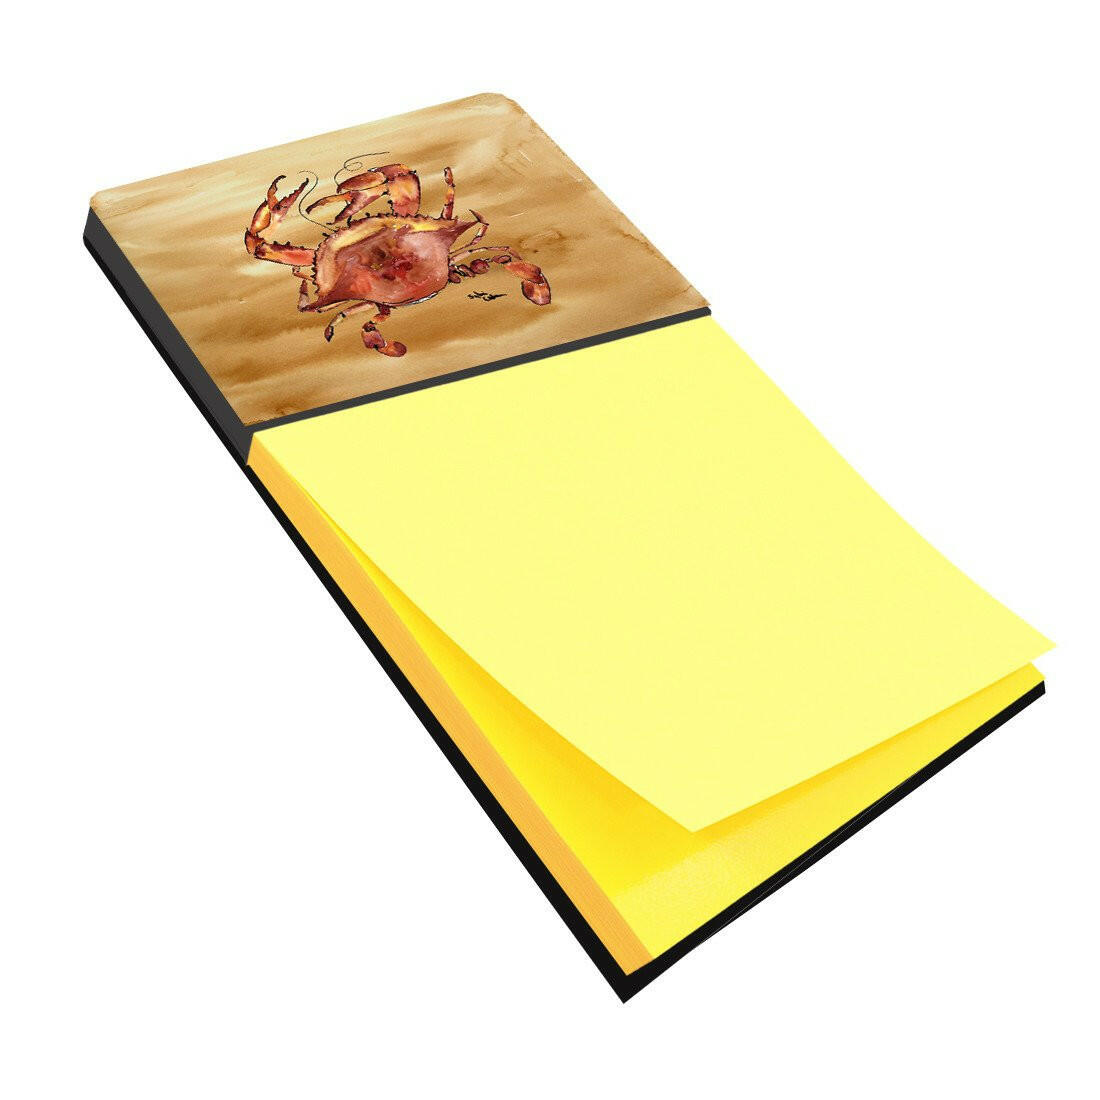 Cooked Crab Sandy Beach Refiillable Sticky Note Holder or Postit Note Dispenser 8154SN by Caroline's Treasures